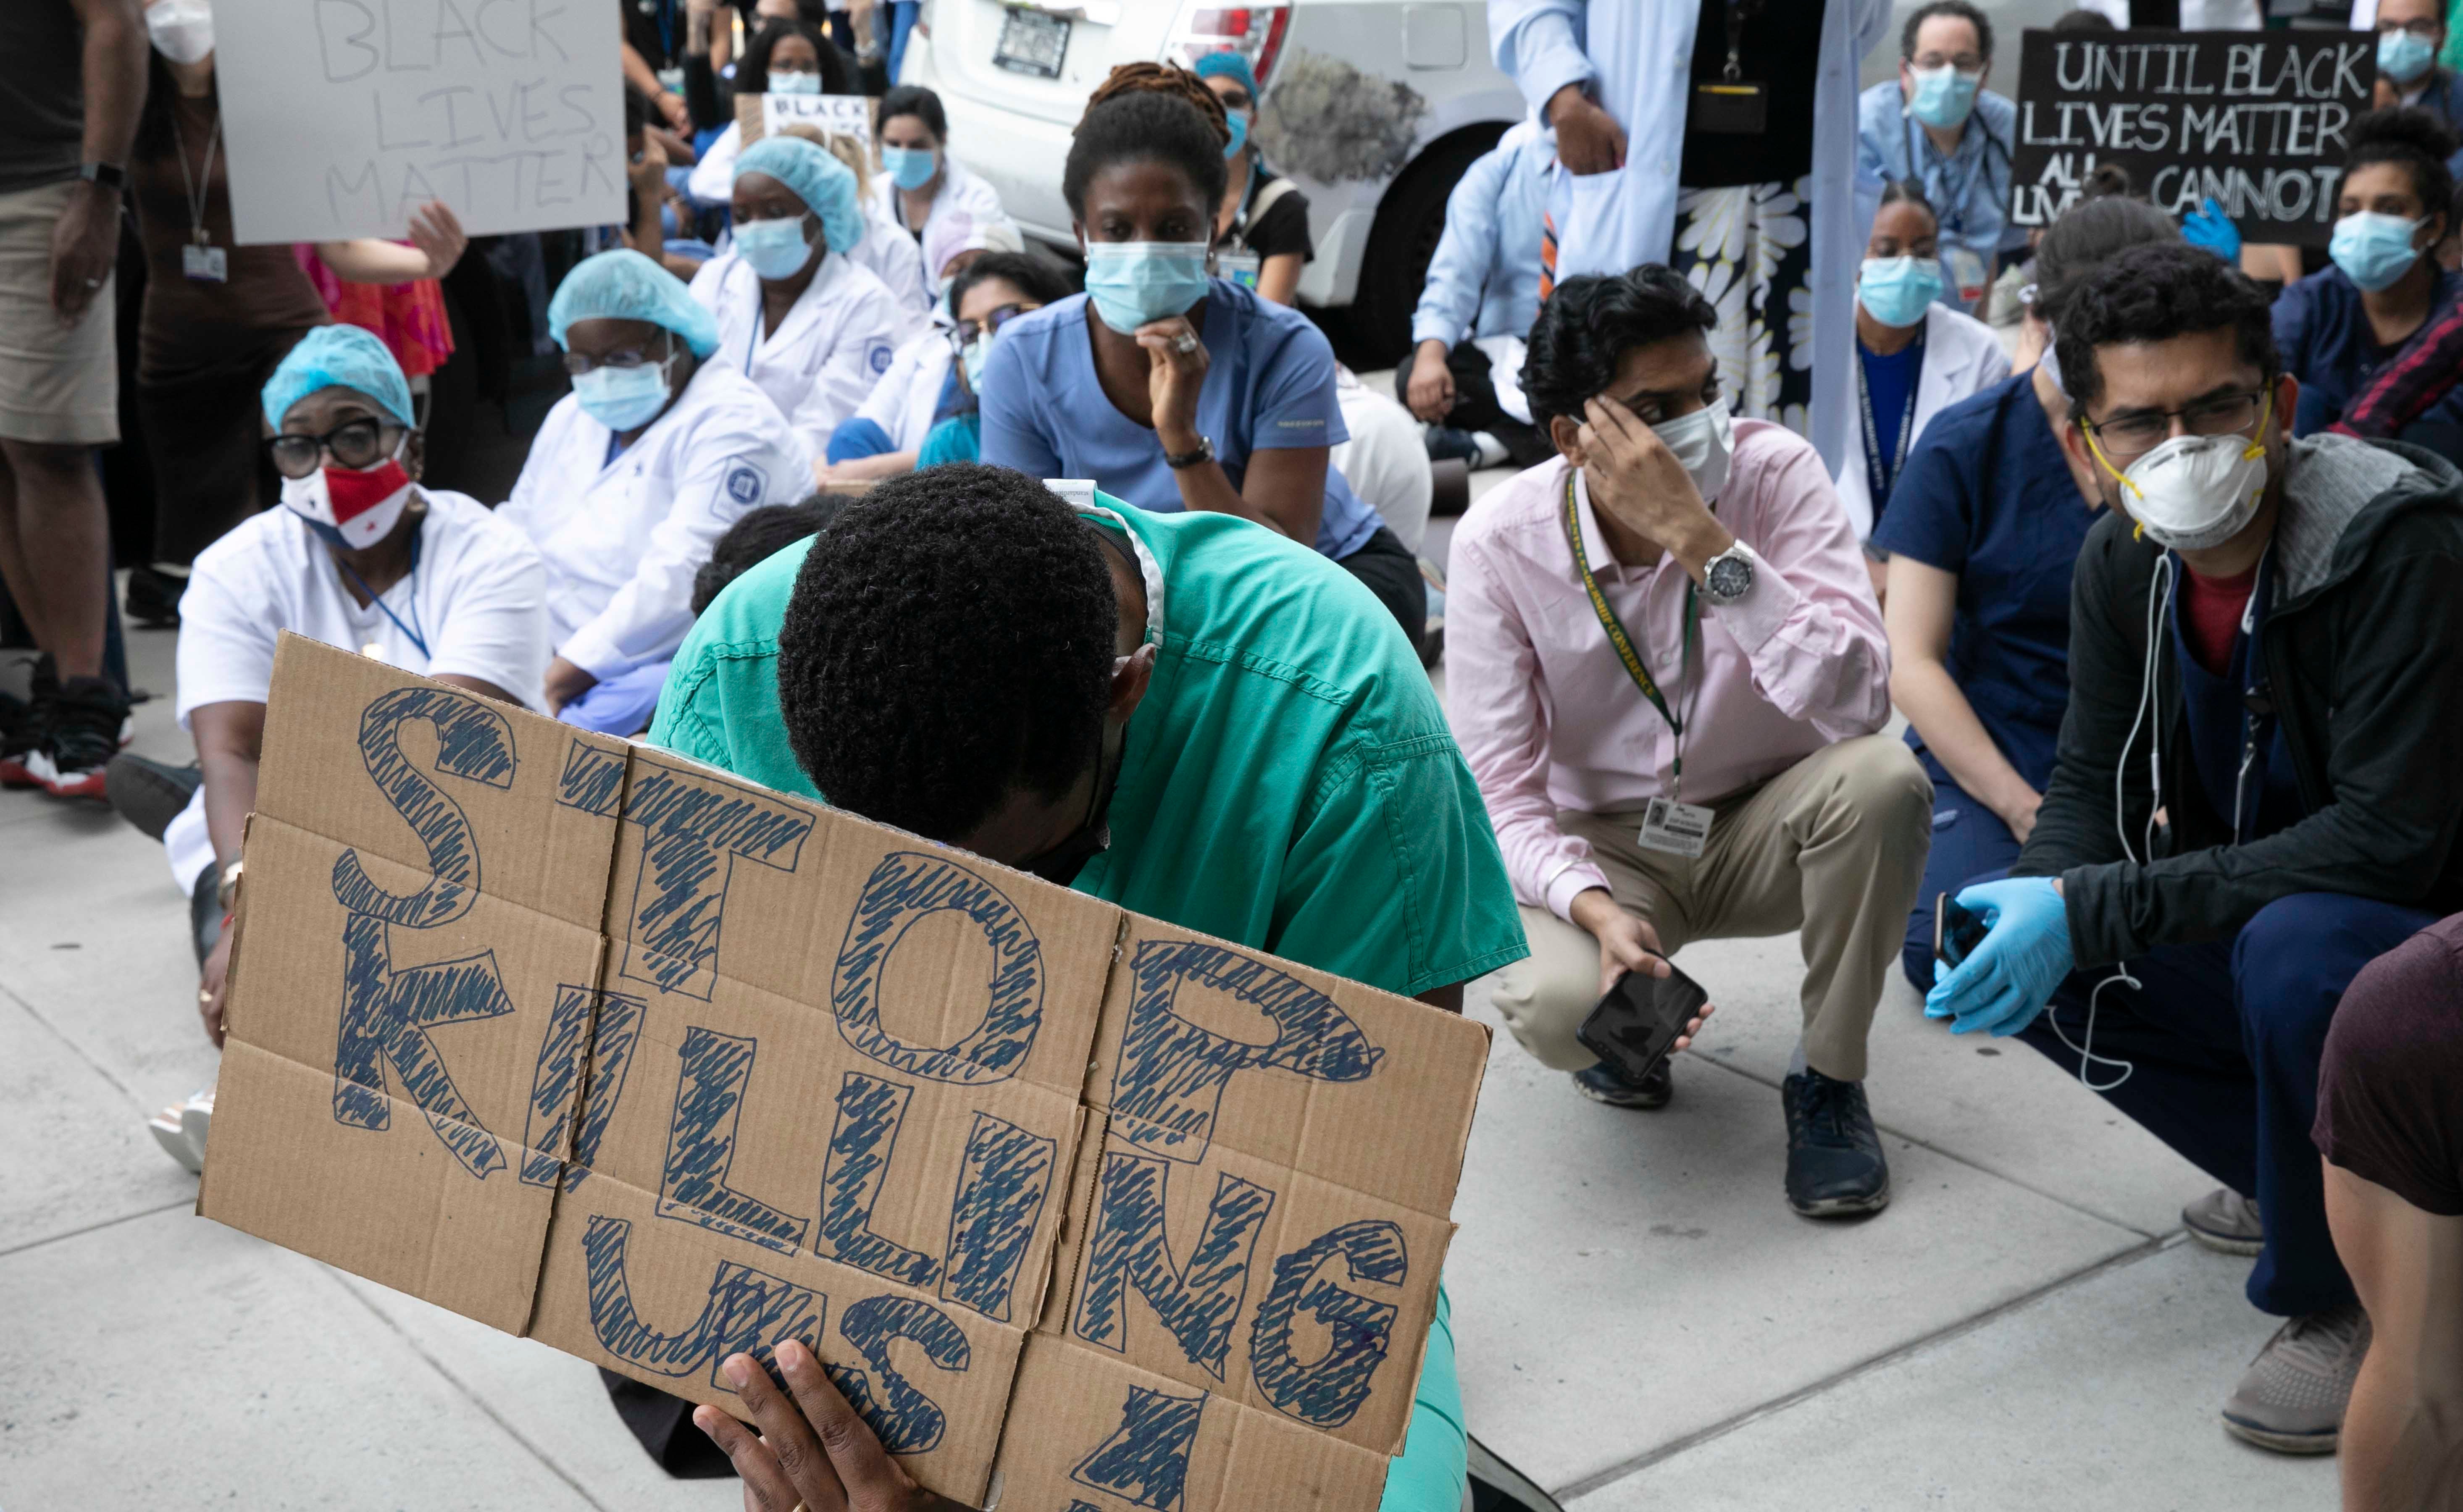 Healthcare workers at Brooklyn's Kings County Hospital show their solidarity with the Black Lives Matter movement during the coronavirus pandemic, New York, June 4, 2020.